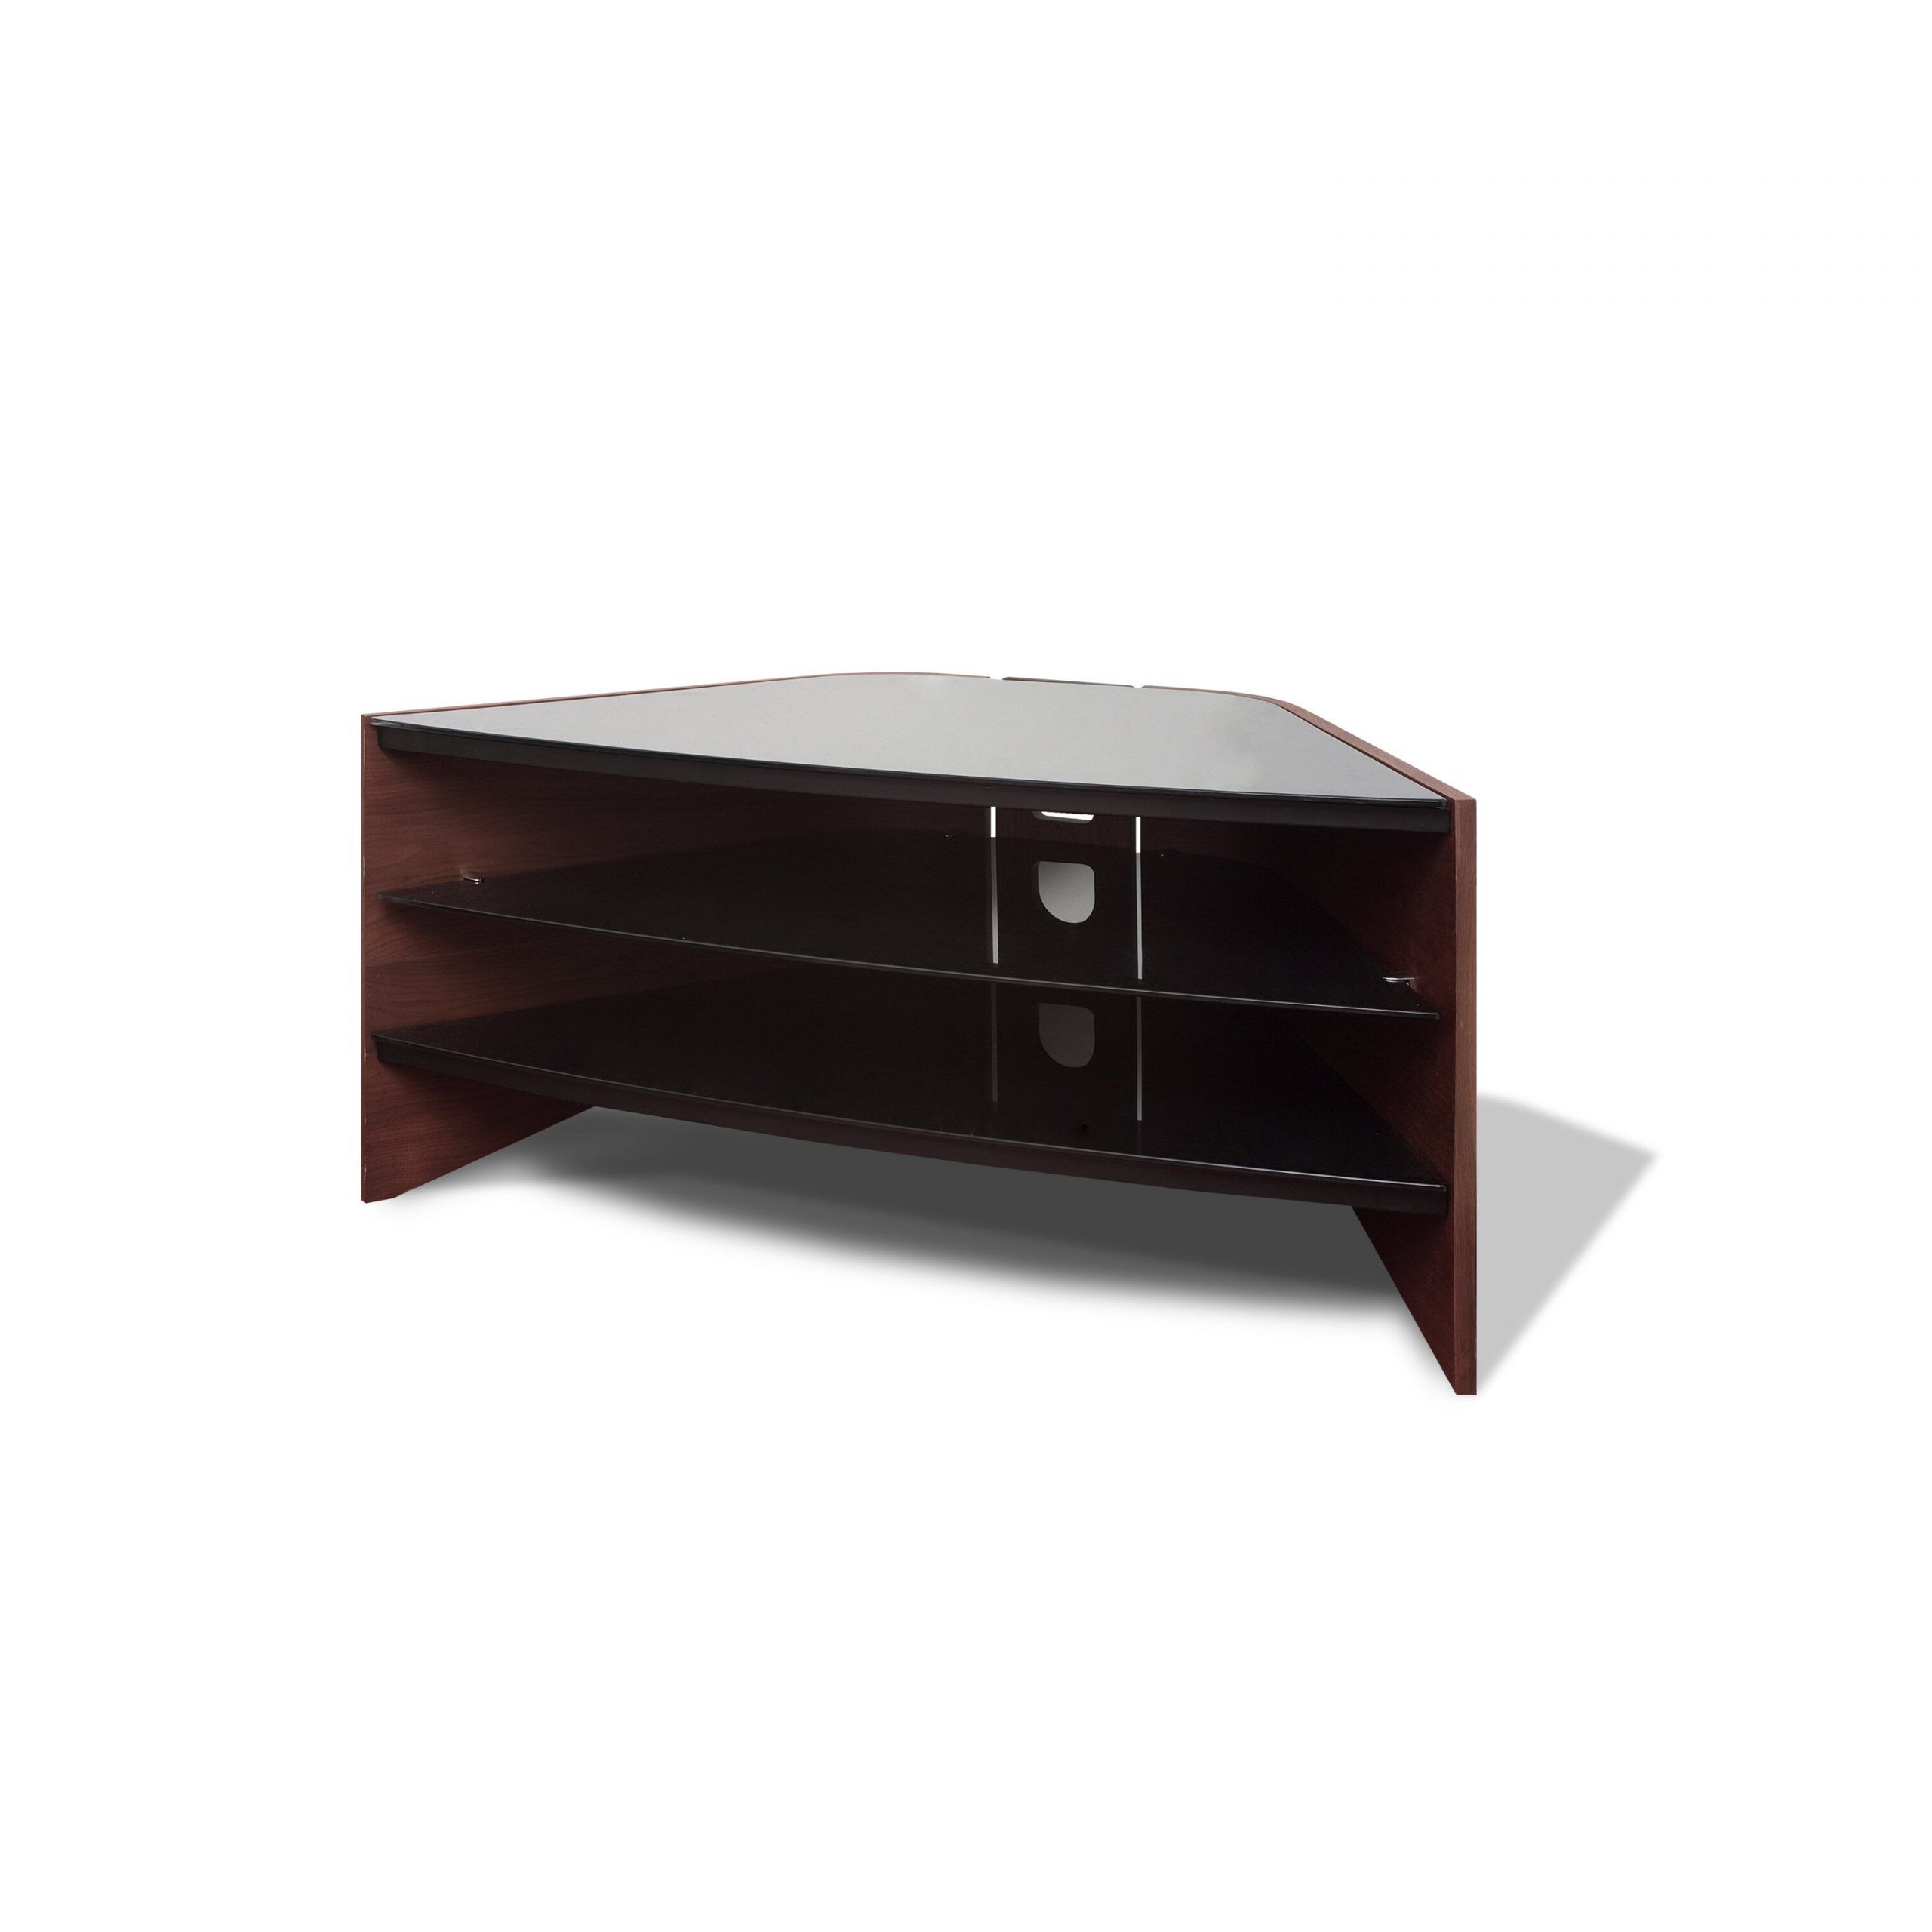 Techlink Riva Tv Stand & Reviews | Wayfair In Techlink Tv Stands Sale (View 13 of 15)